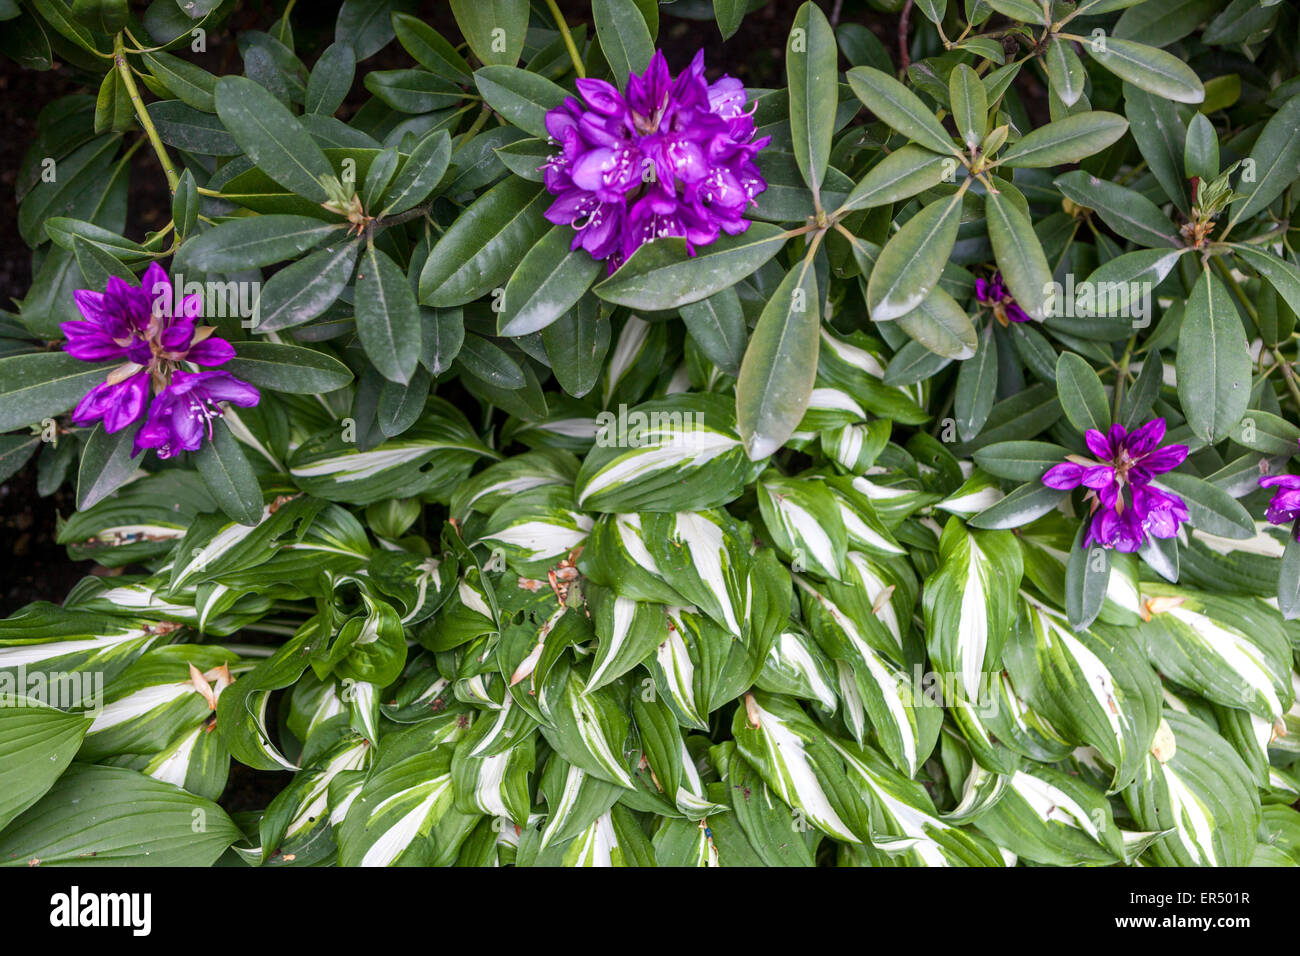 Rhododendron flowering, Hosta variegated leaves Stock Photo